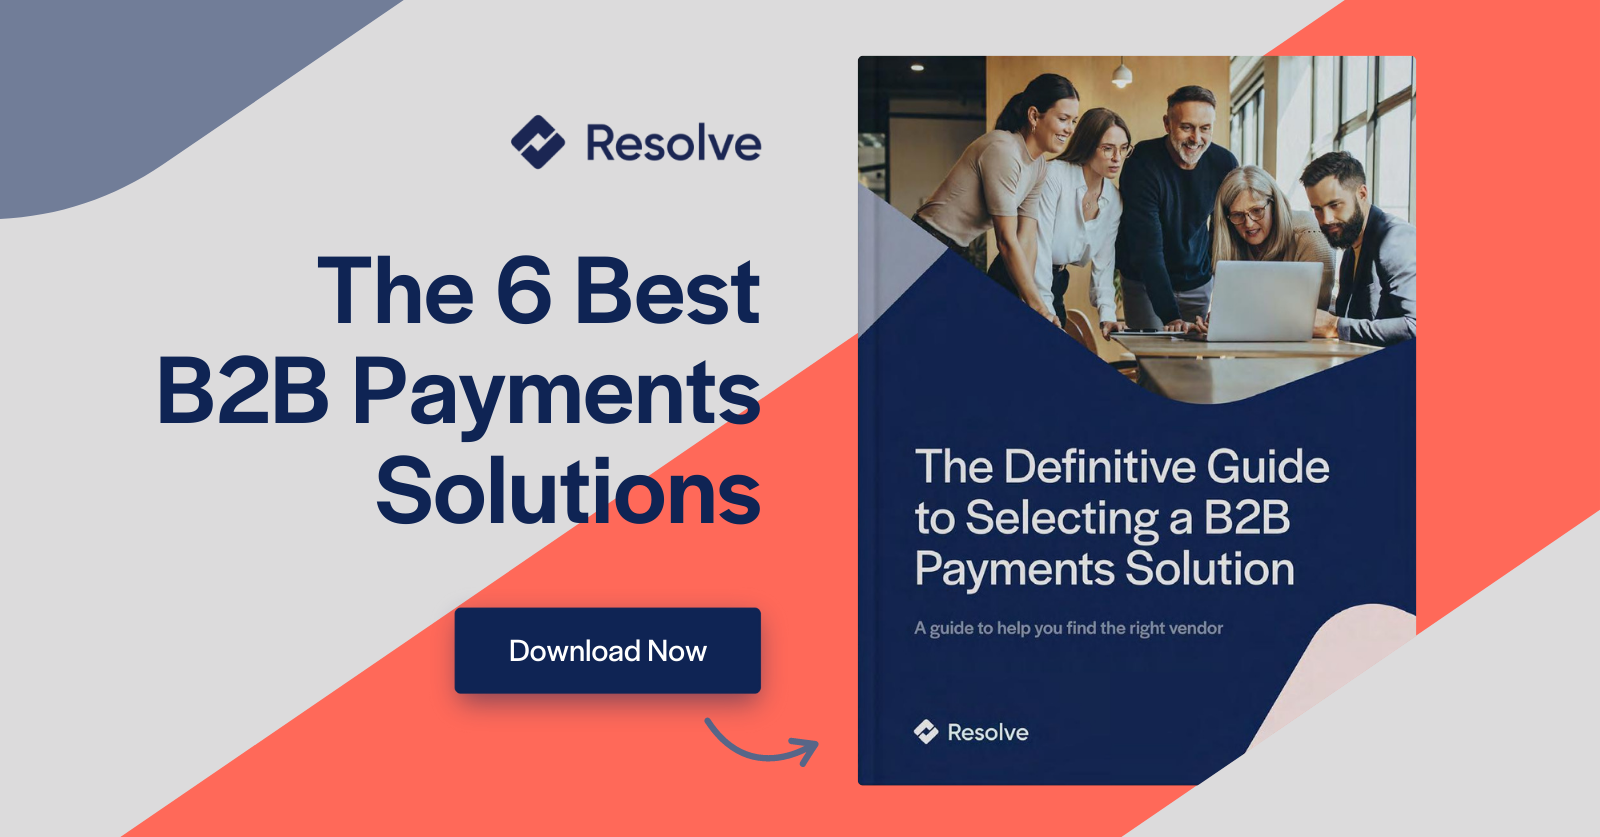 The Definitive Guide to Selecting a B2B Payments Solution